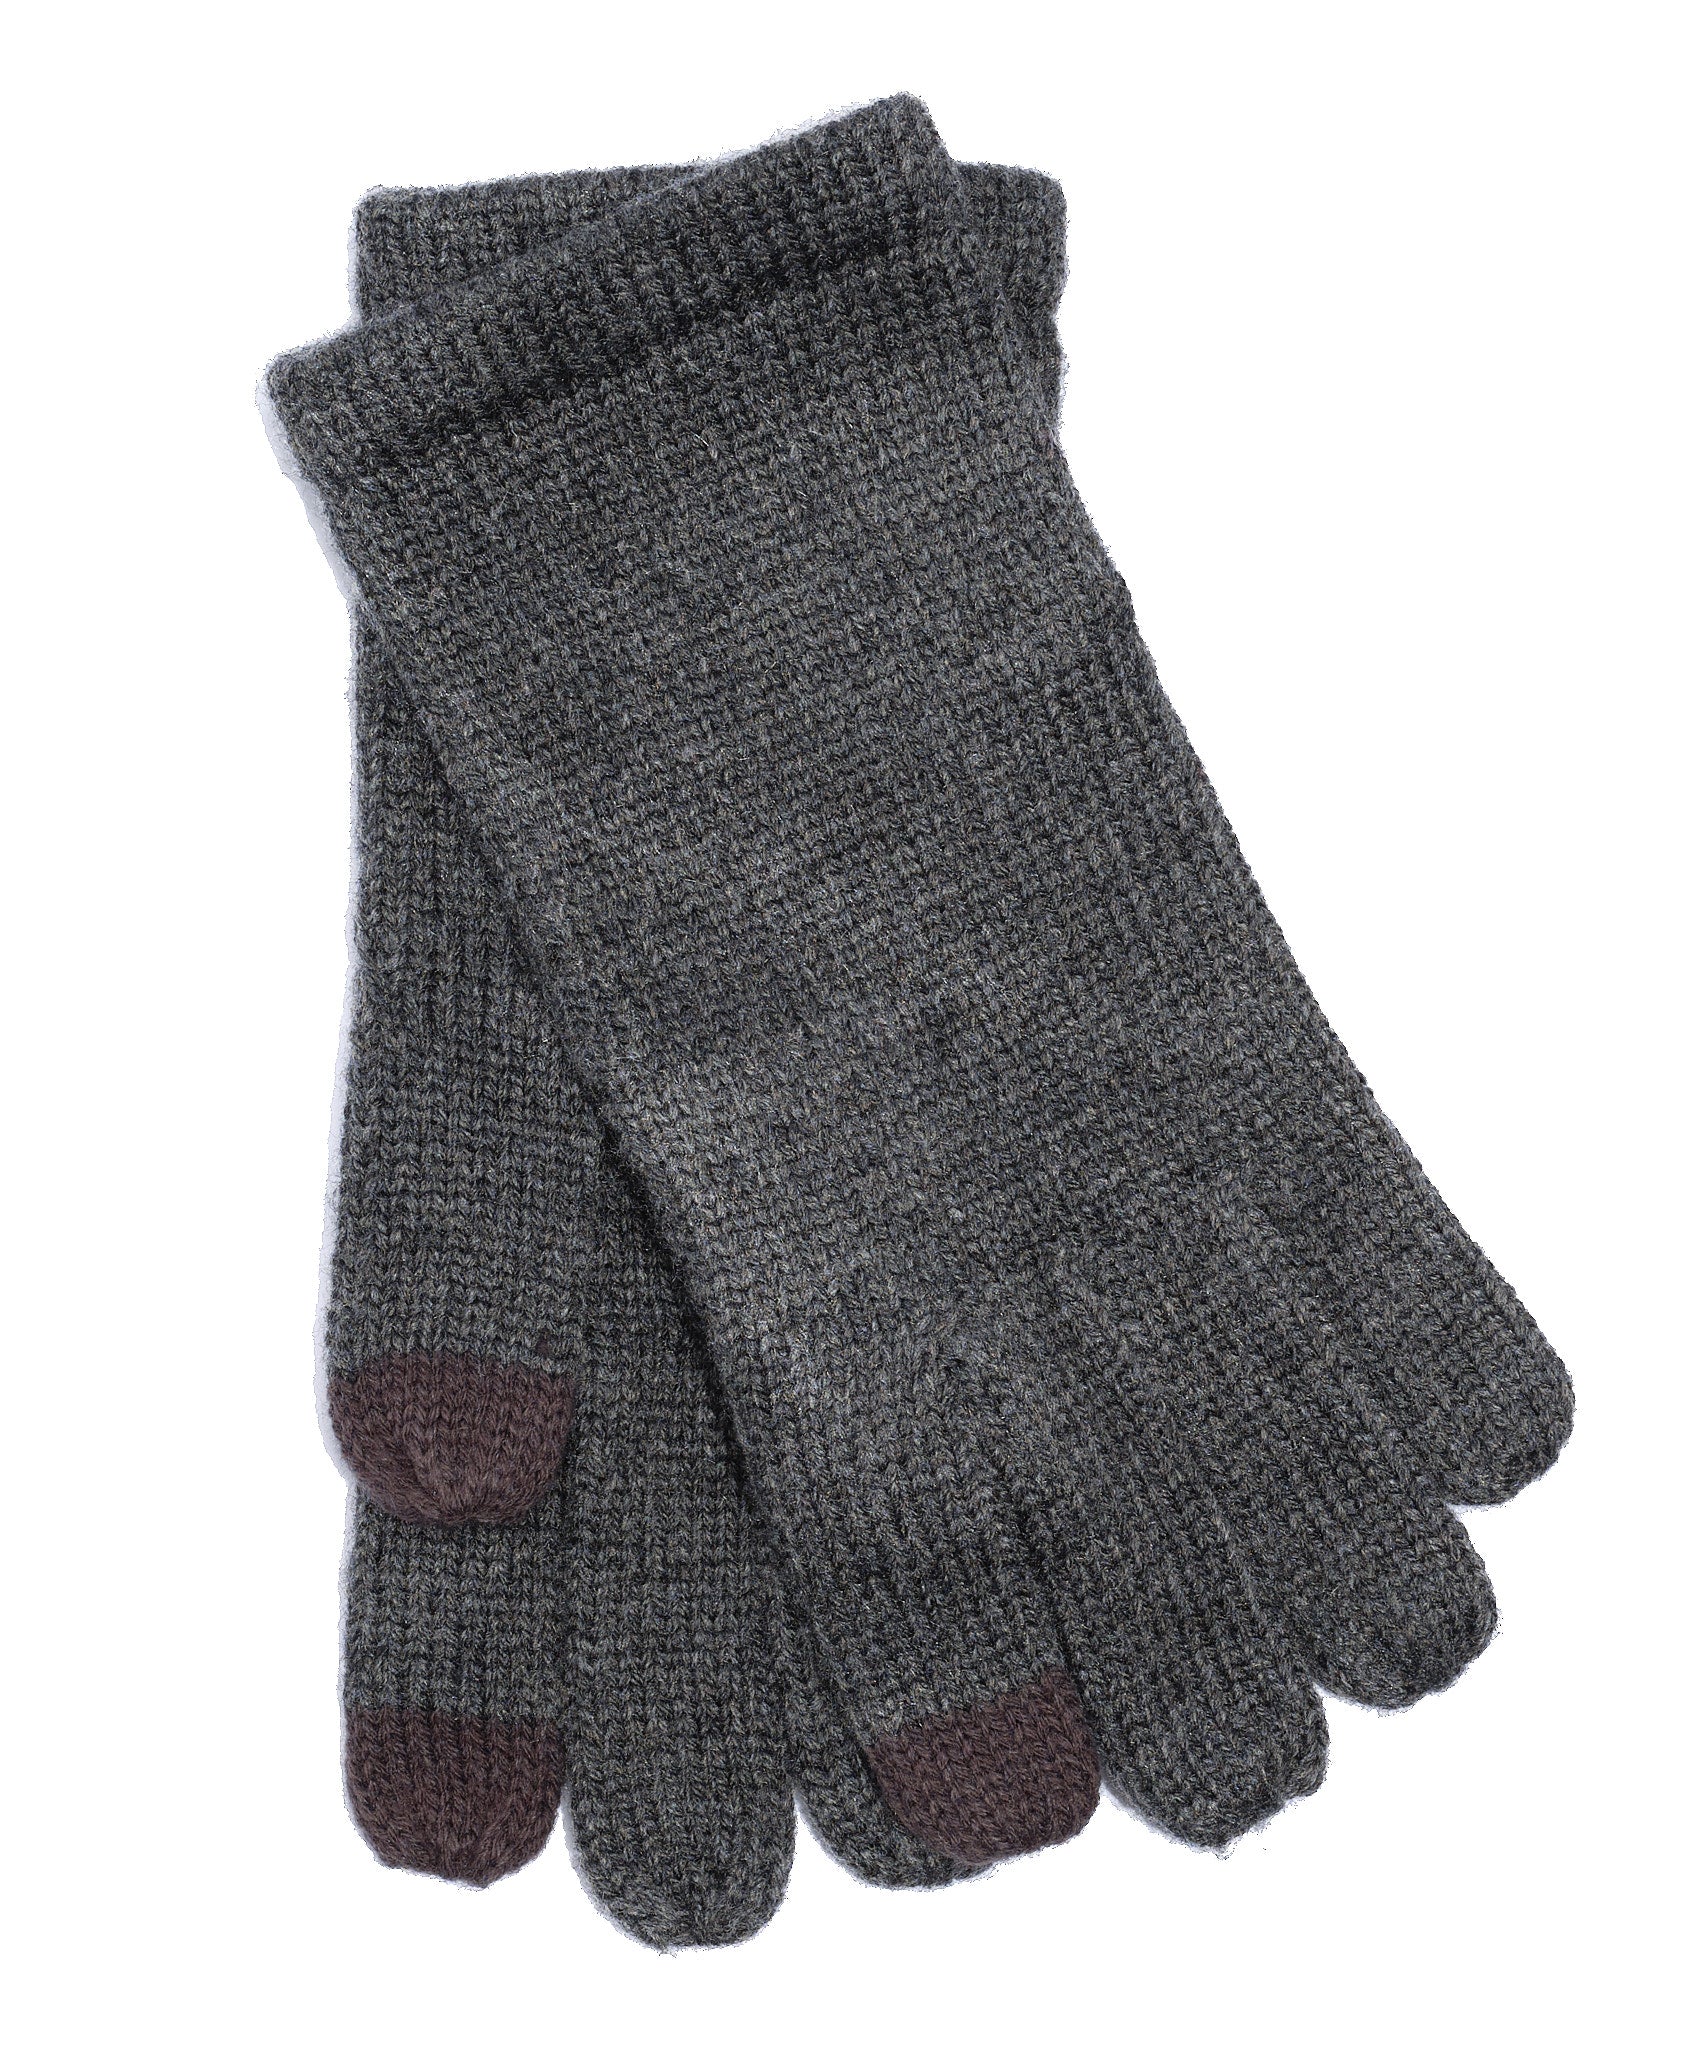 Echo Touch Glove in color Charcoal